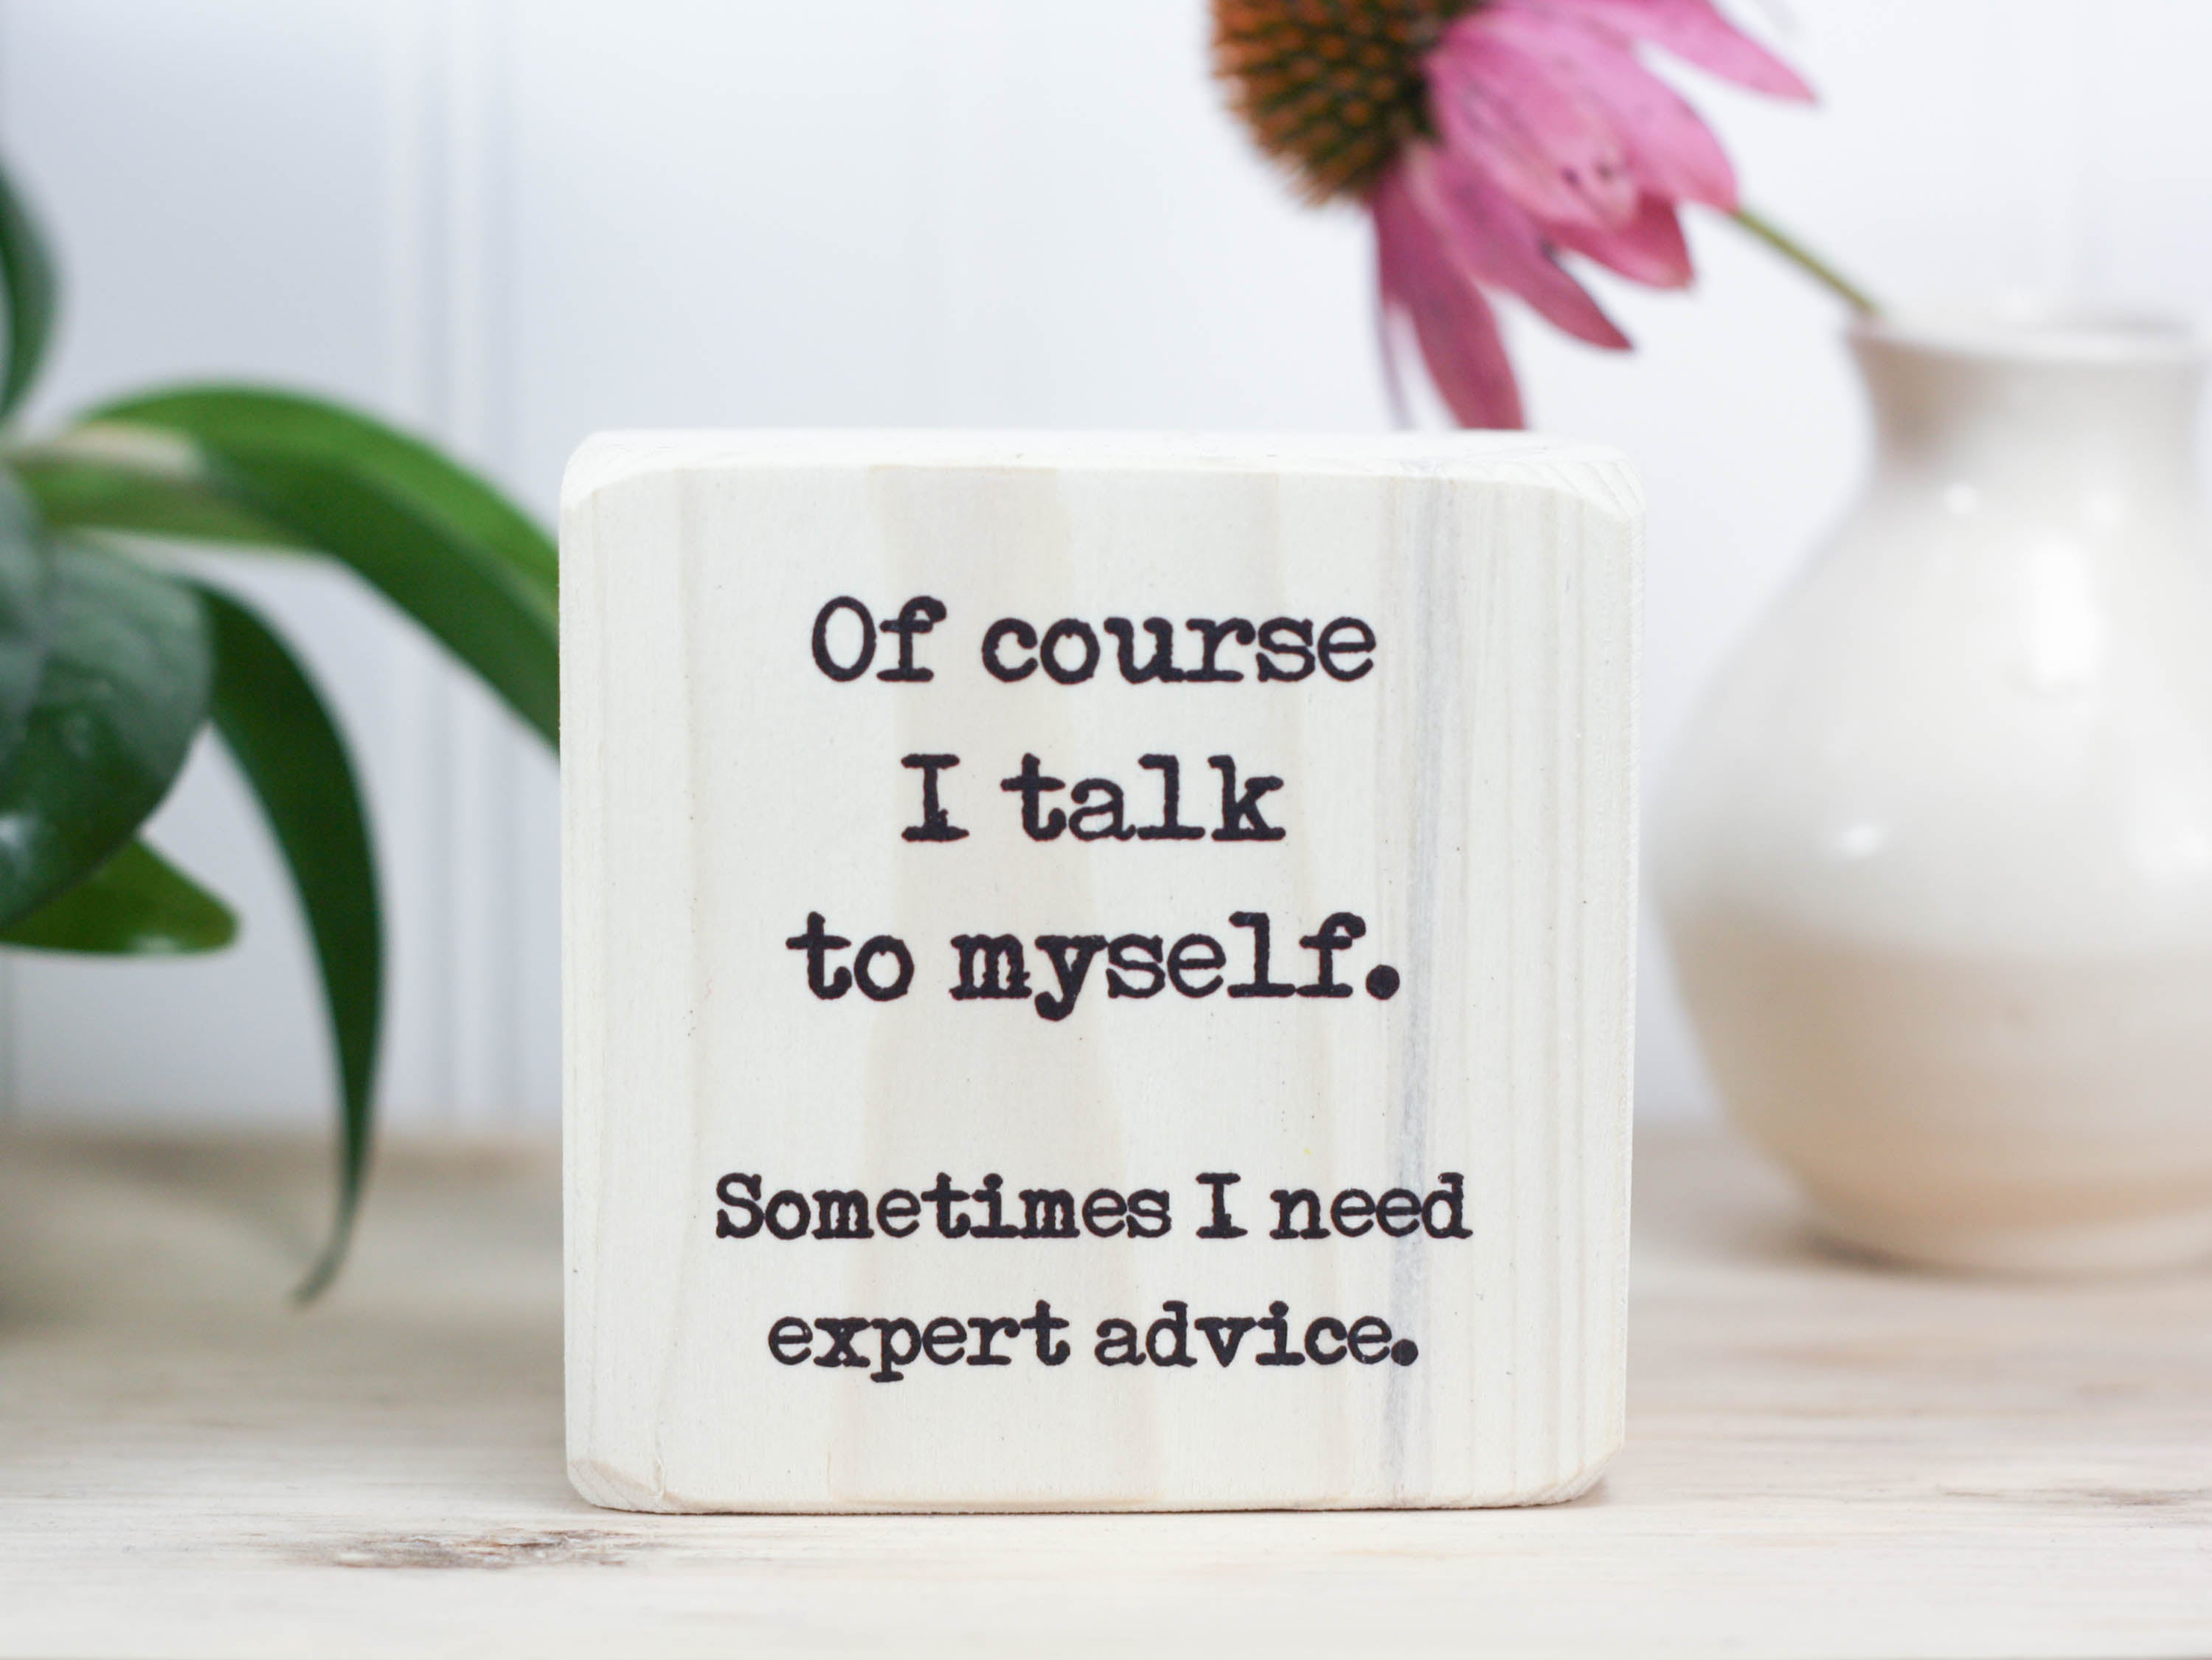 Small wood sign in whitewash with the saying "Of course I talk to myself. Sometimes I need expert advice."